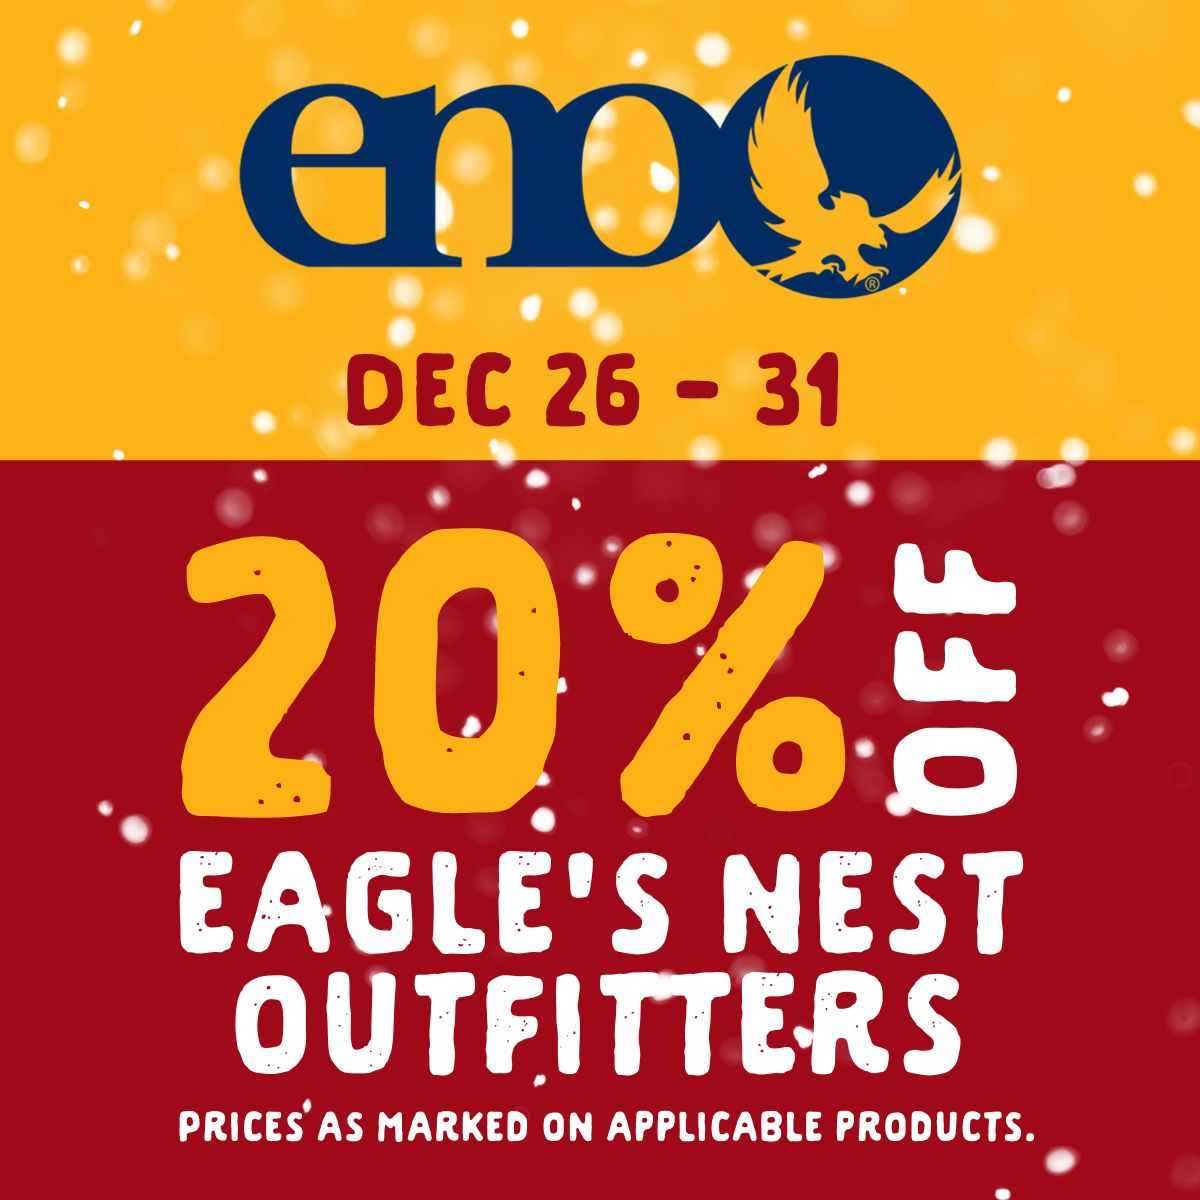 20% off Eagle's Nest Outfitters from December 26 to 31. Prices as marked on applicable products.